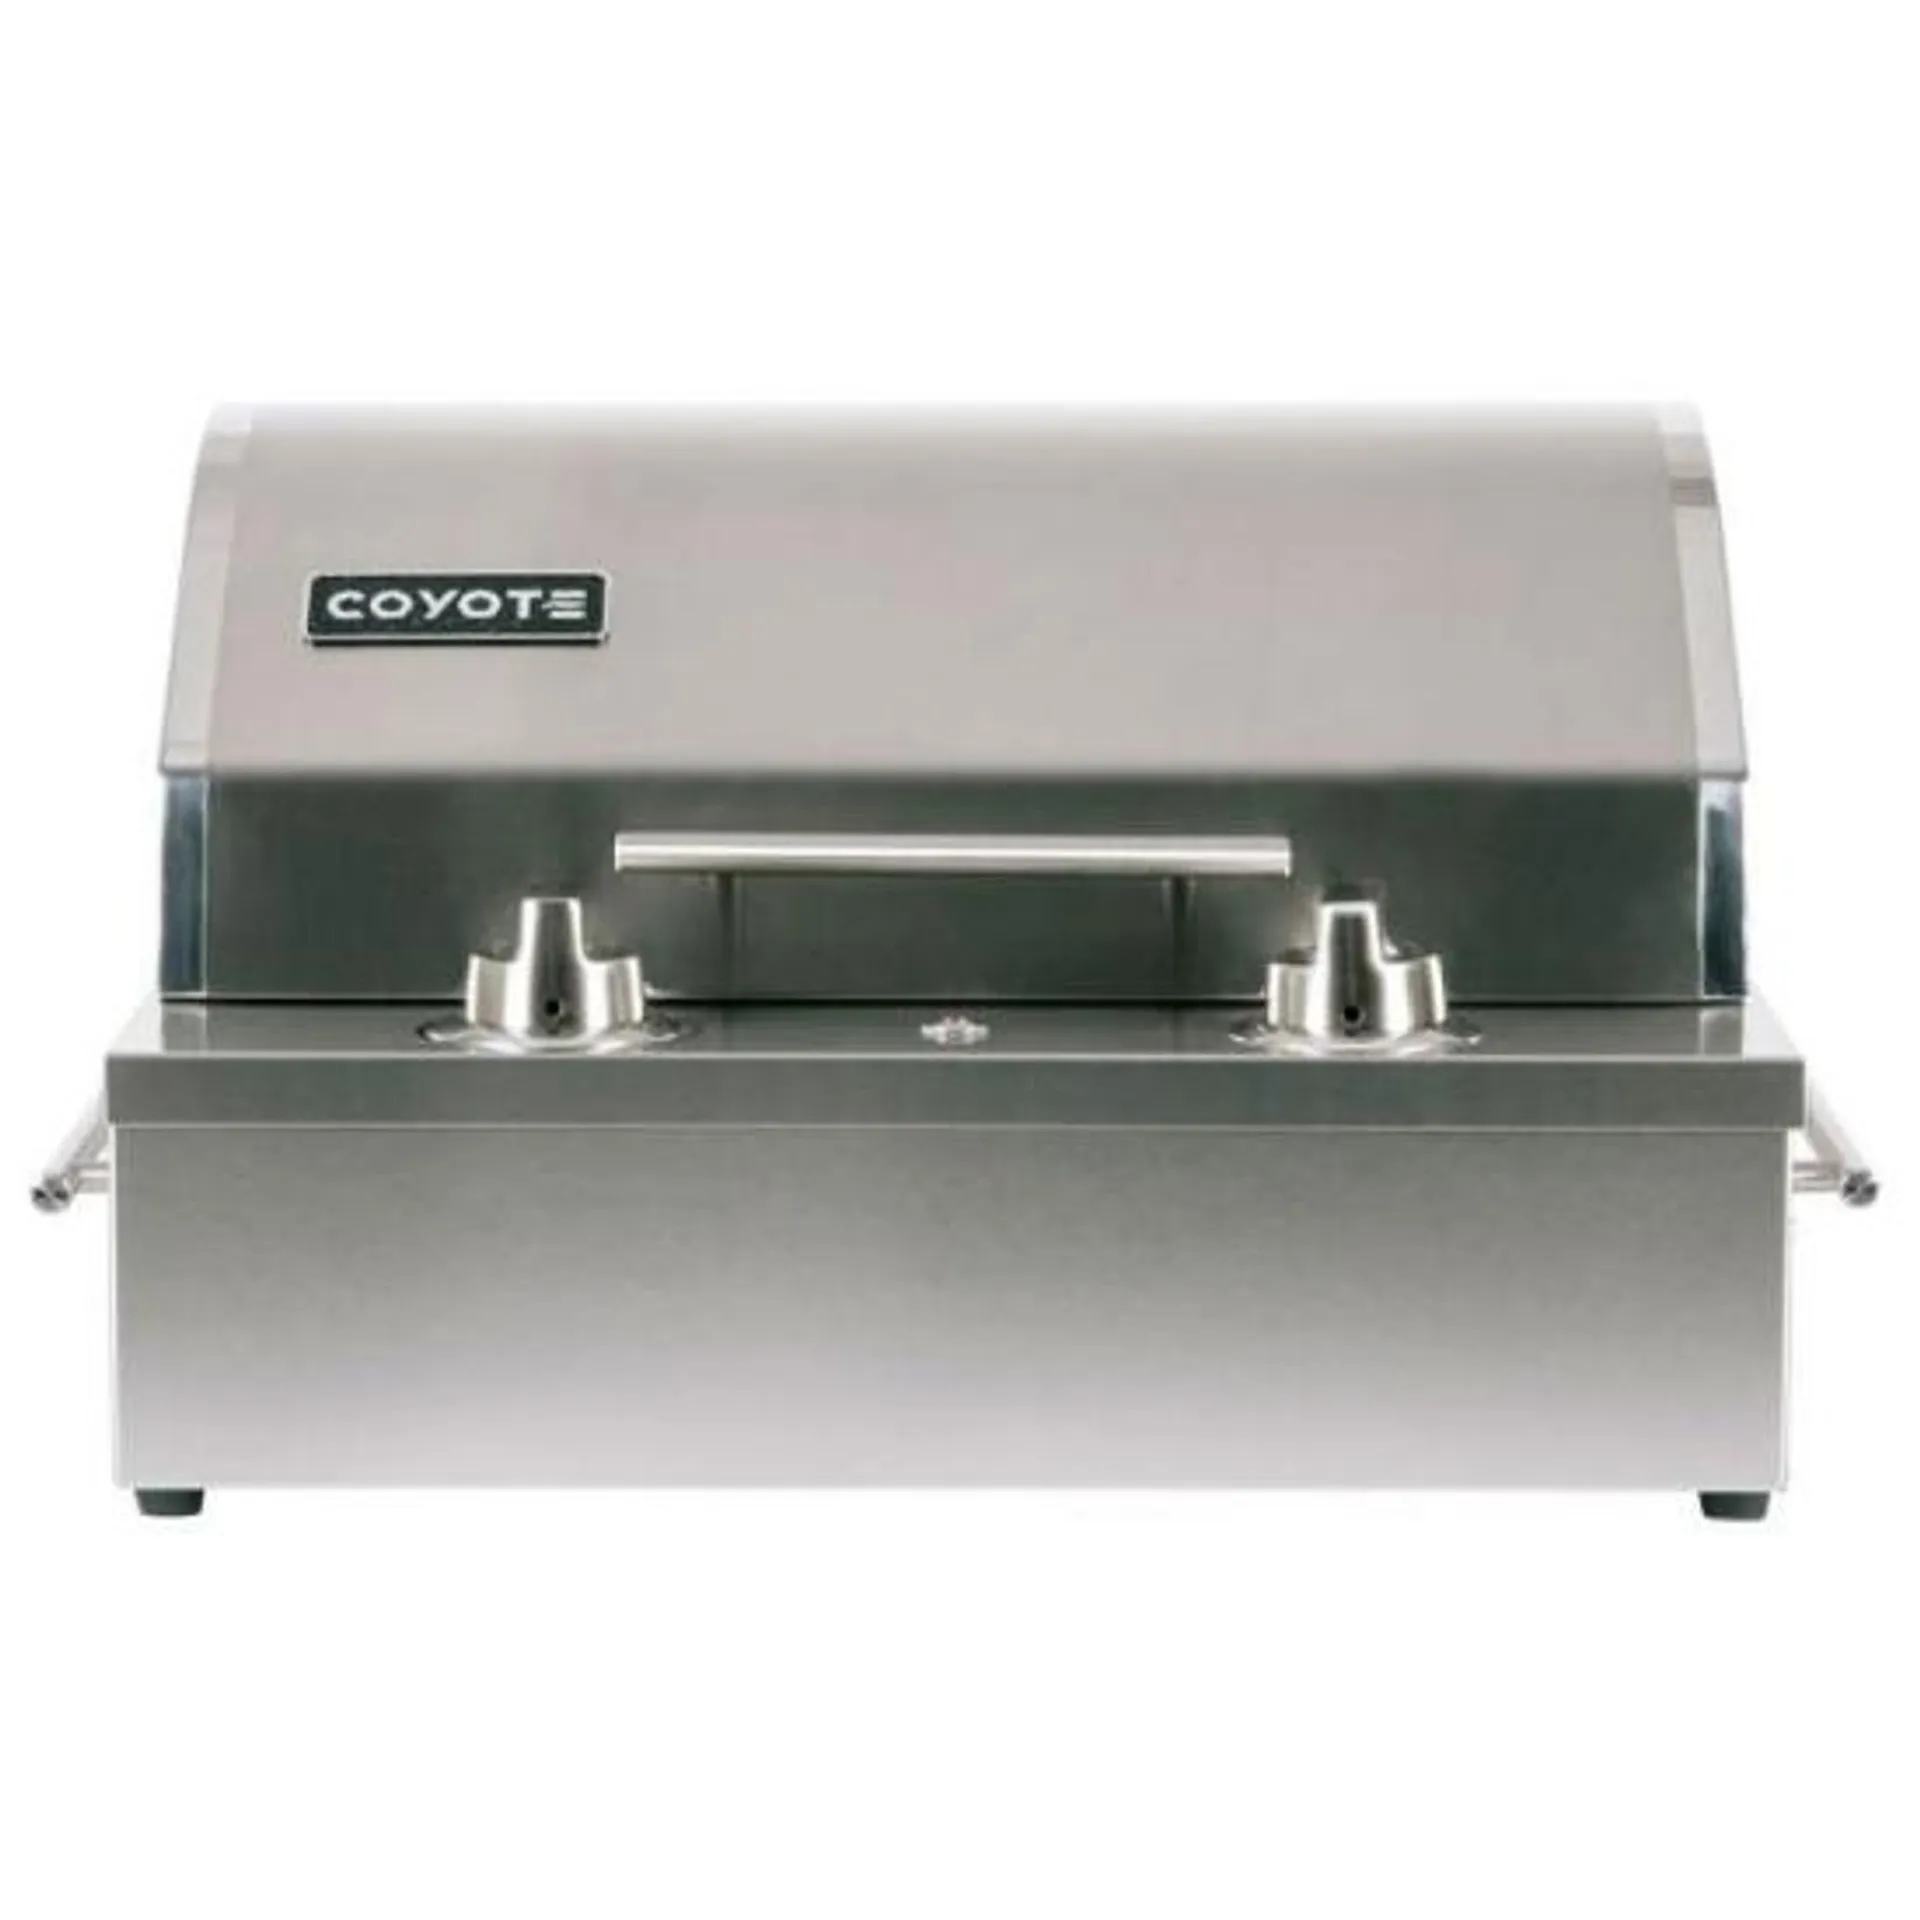 Coyote C1EL120SM BBQ Grill, 18 1/8" Width, Built- In, 156 sq. in. Cooking Area, Stainless Steel colour Electric BBQ Grill, 550F Max Temperature, 1300W